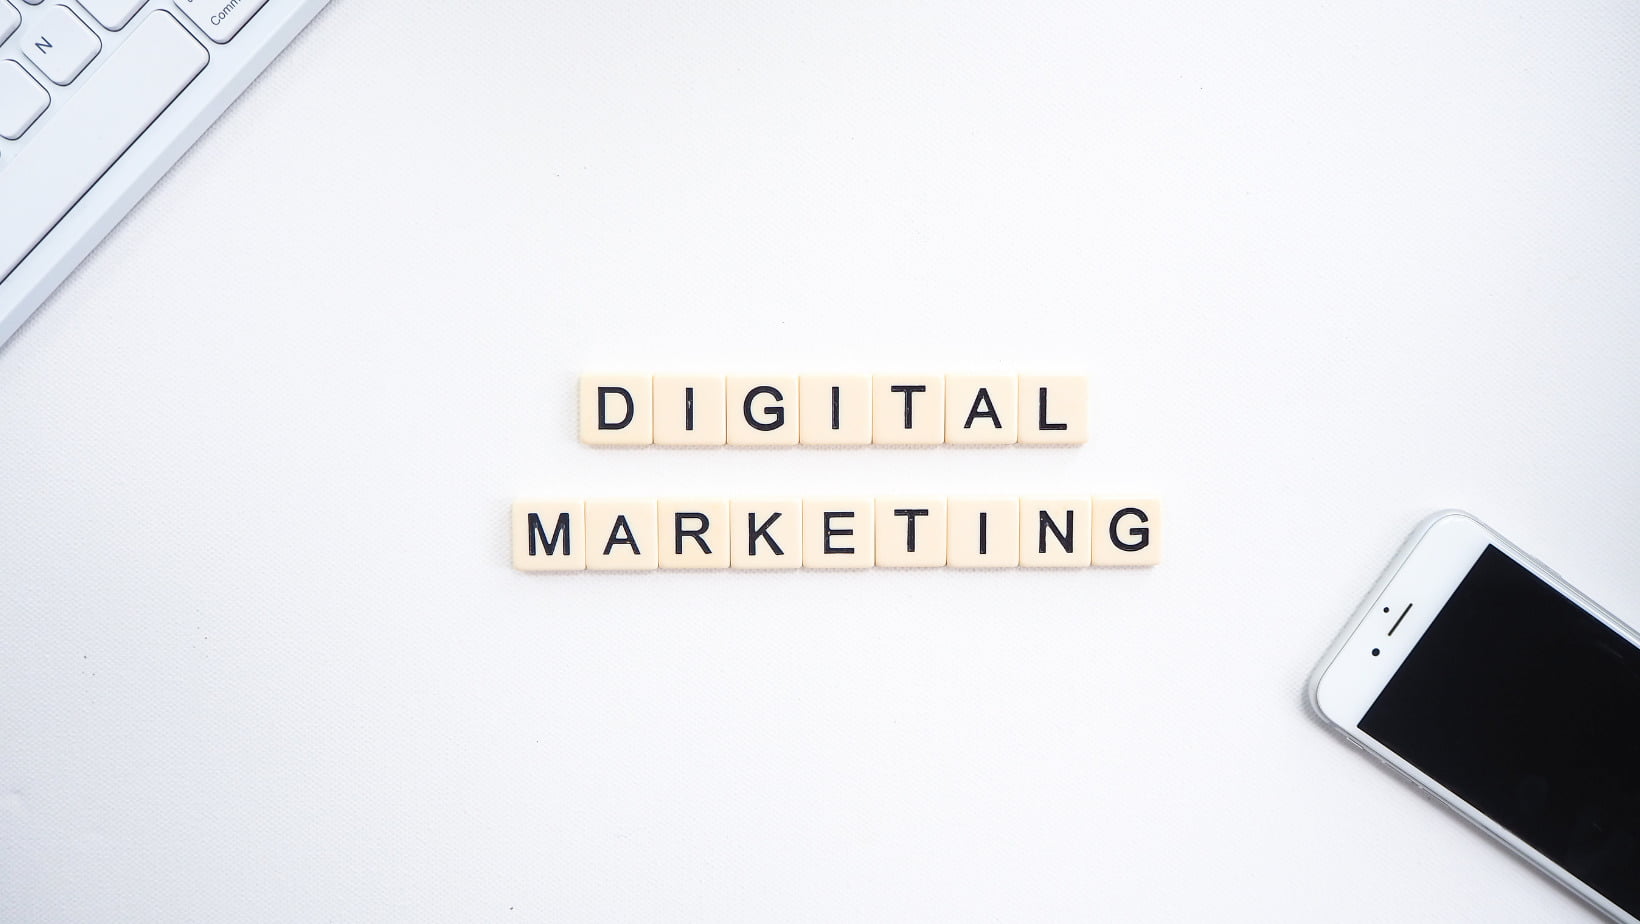 Digital Marketing Agency Services List for 2021